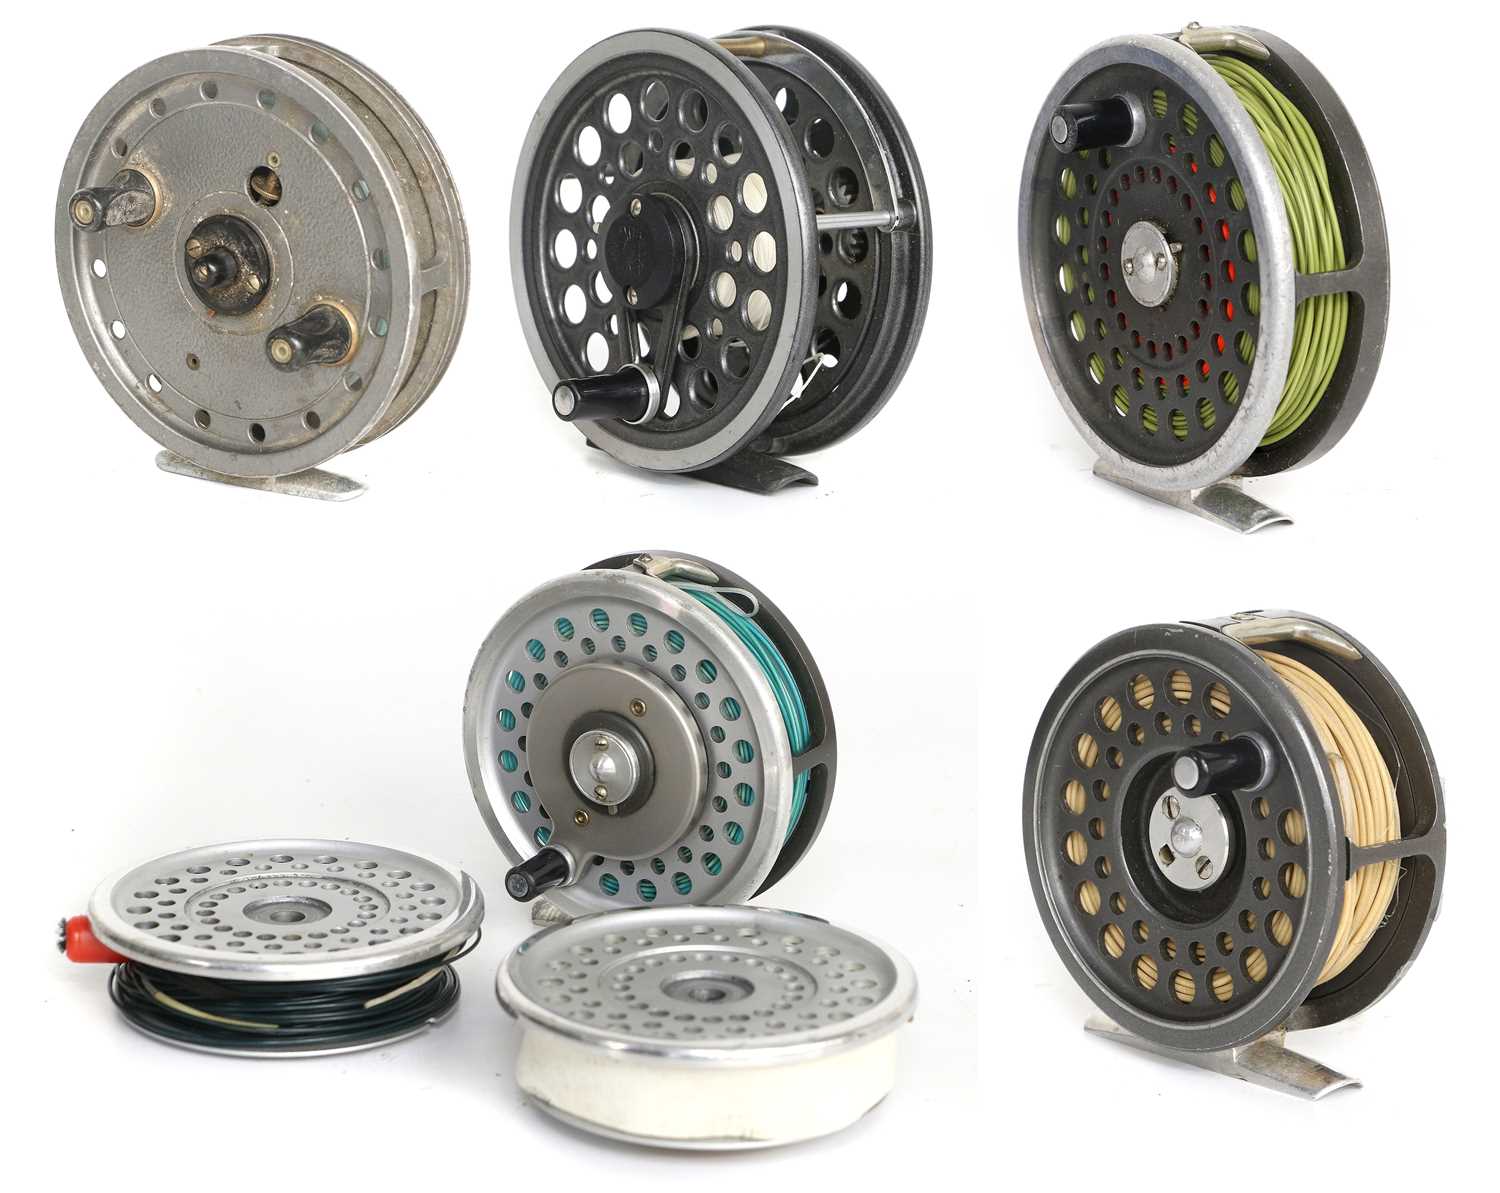 A Group of Fly Fishing Reels